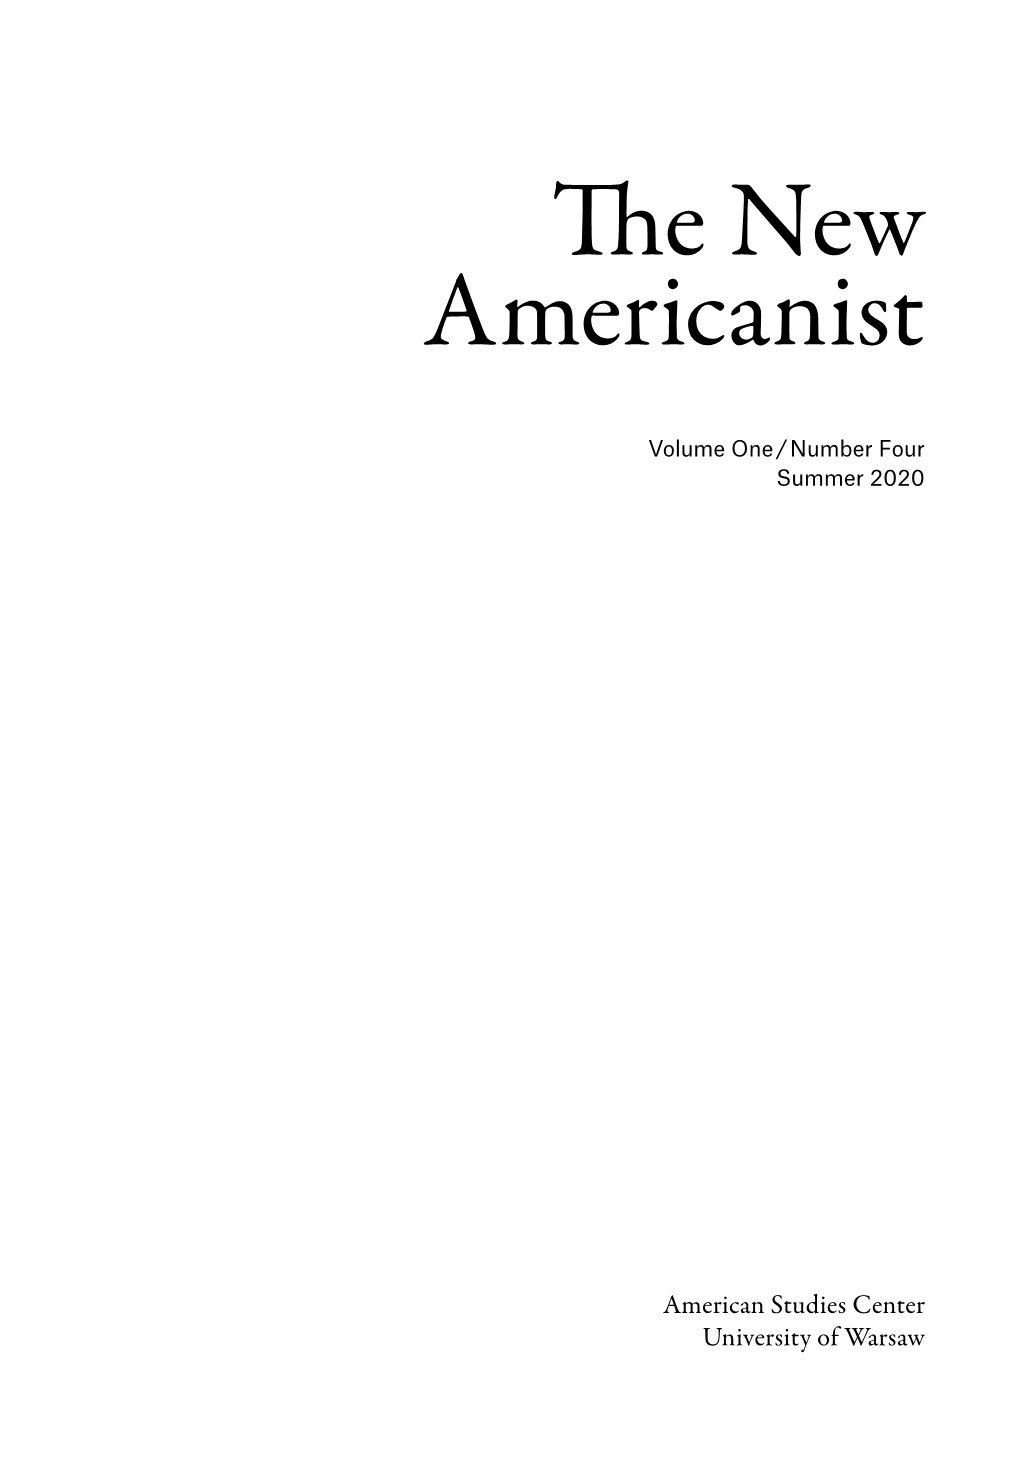 The New Americanist